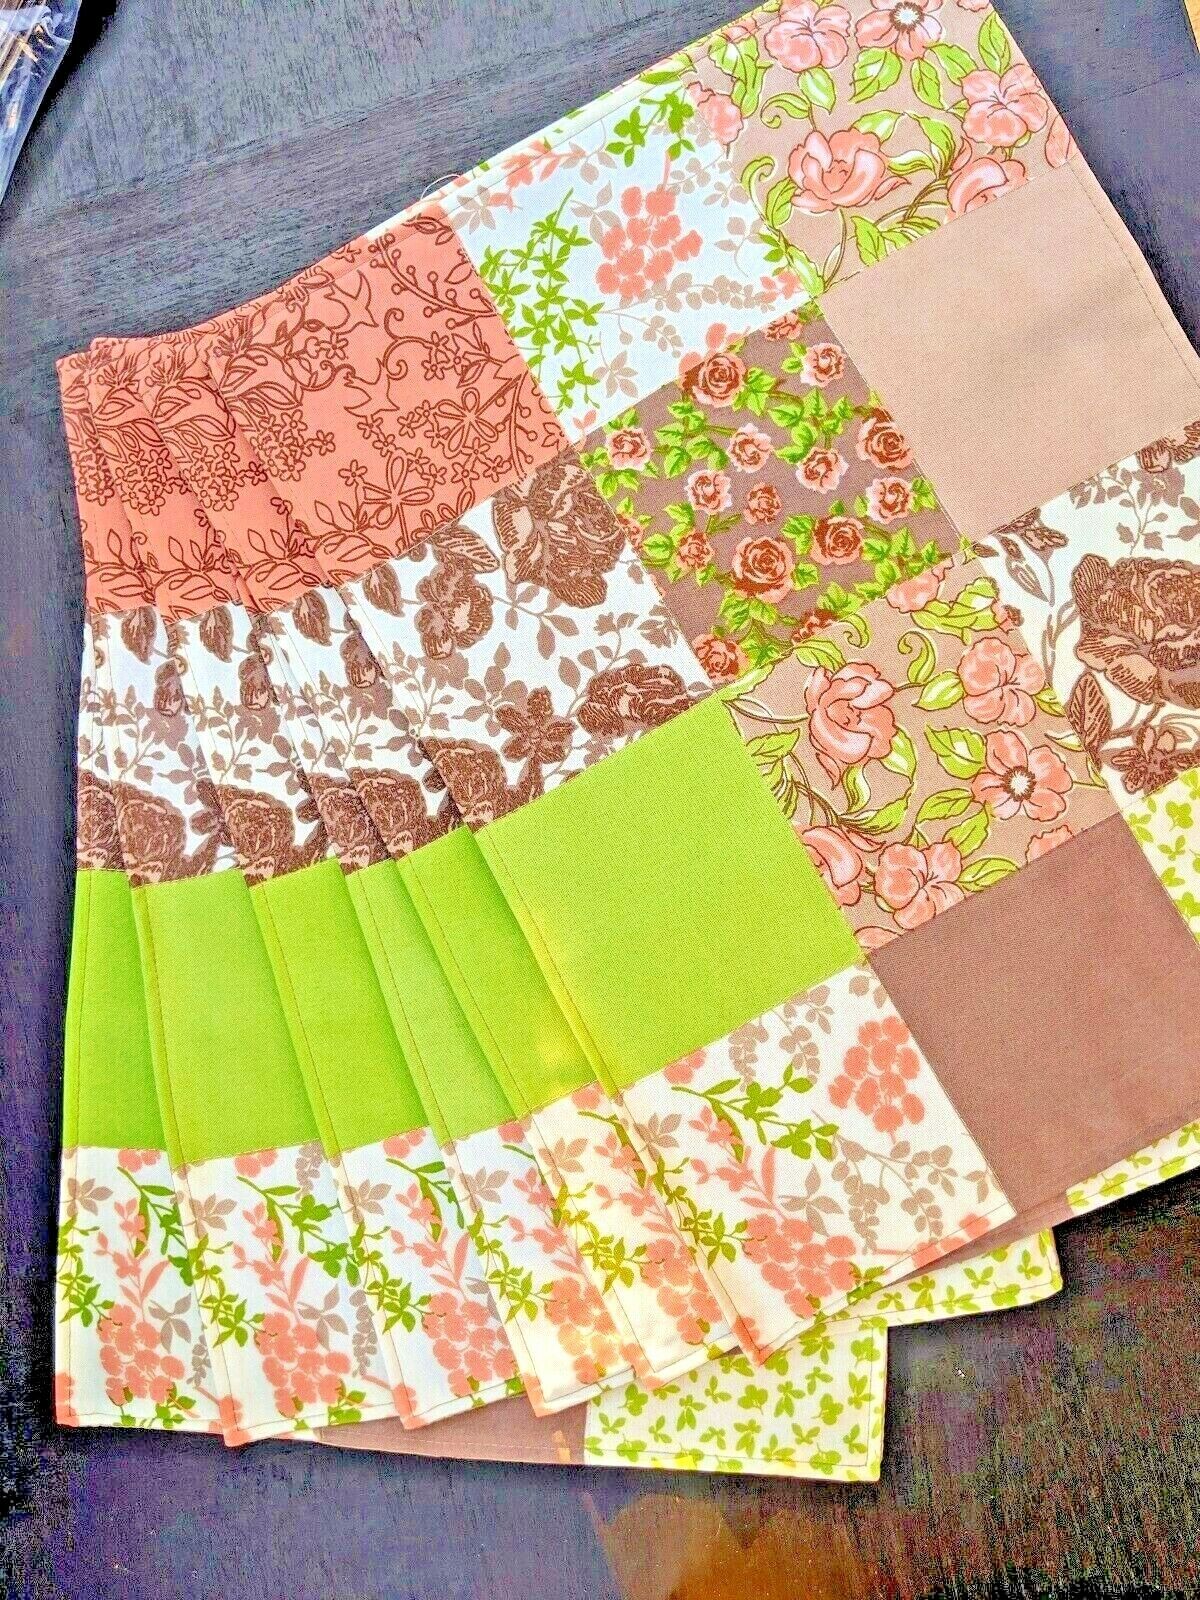 (SET OF 6) MAINSTAYS PATCHWORK QUILT PLACEMATS 13"x18" - Set of Six!! Mainstays ms12-053-531-05